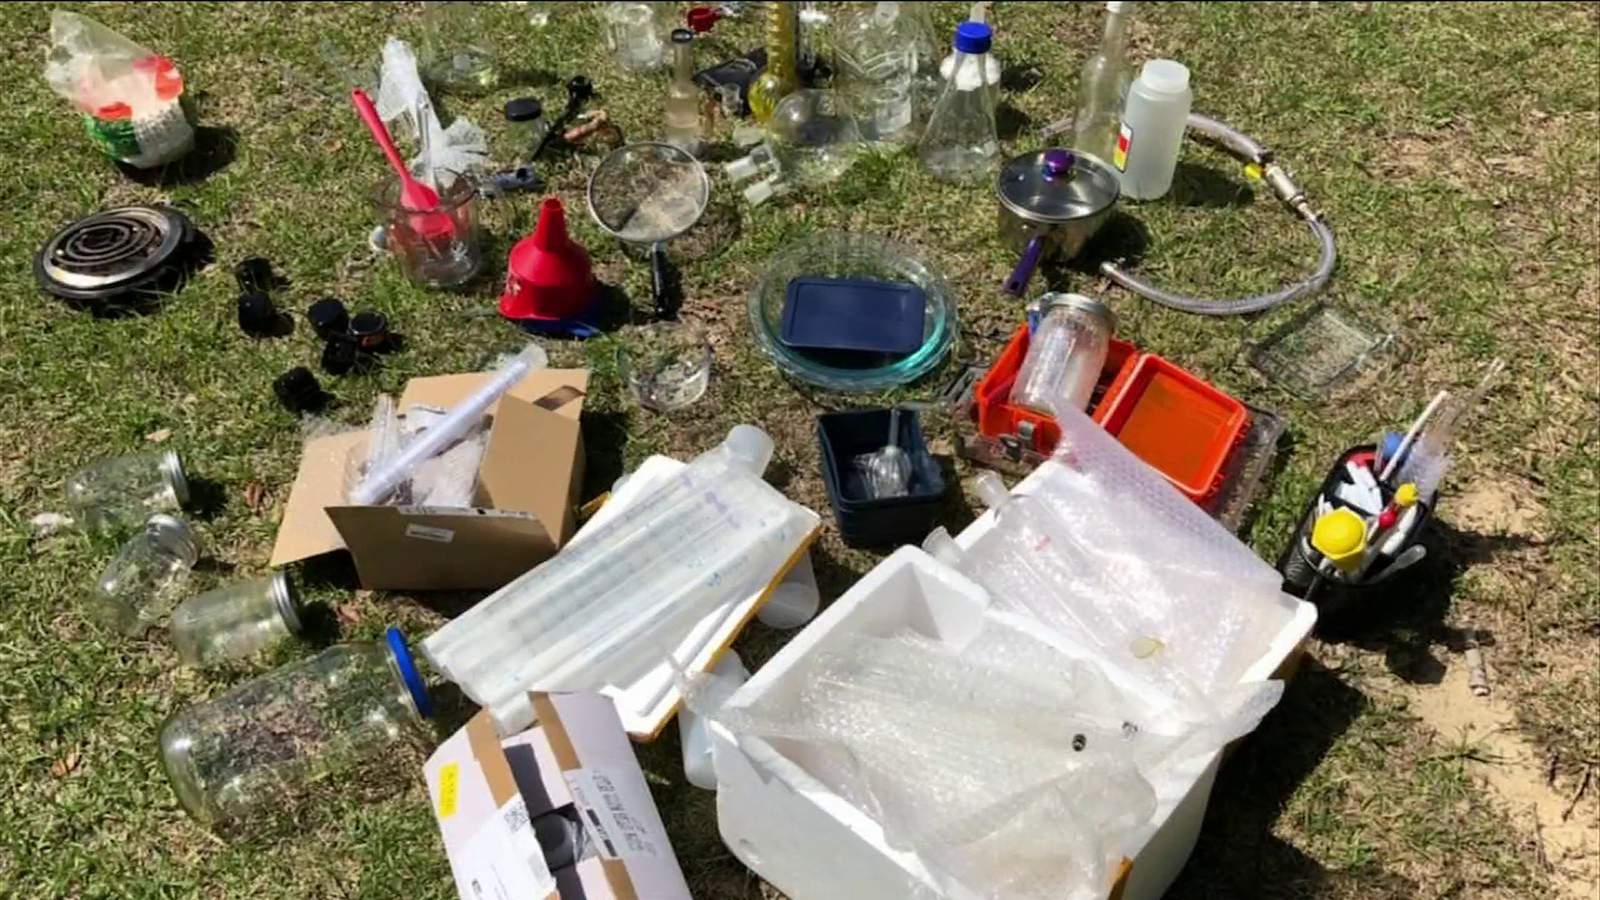 Psychedelic drugs, explosives, lab found at Keystone Heights home, sheriff says